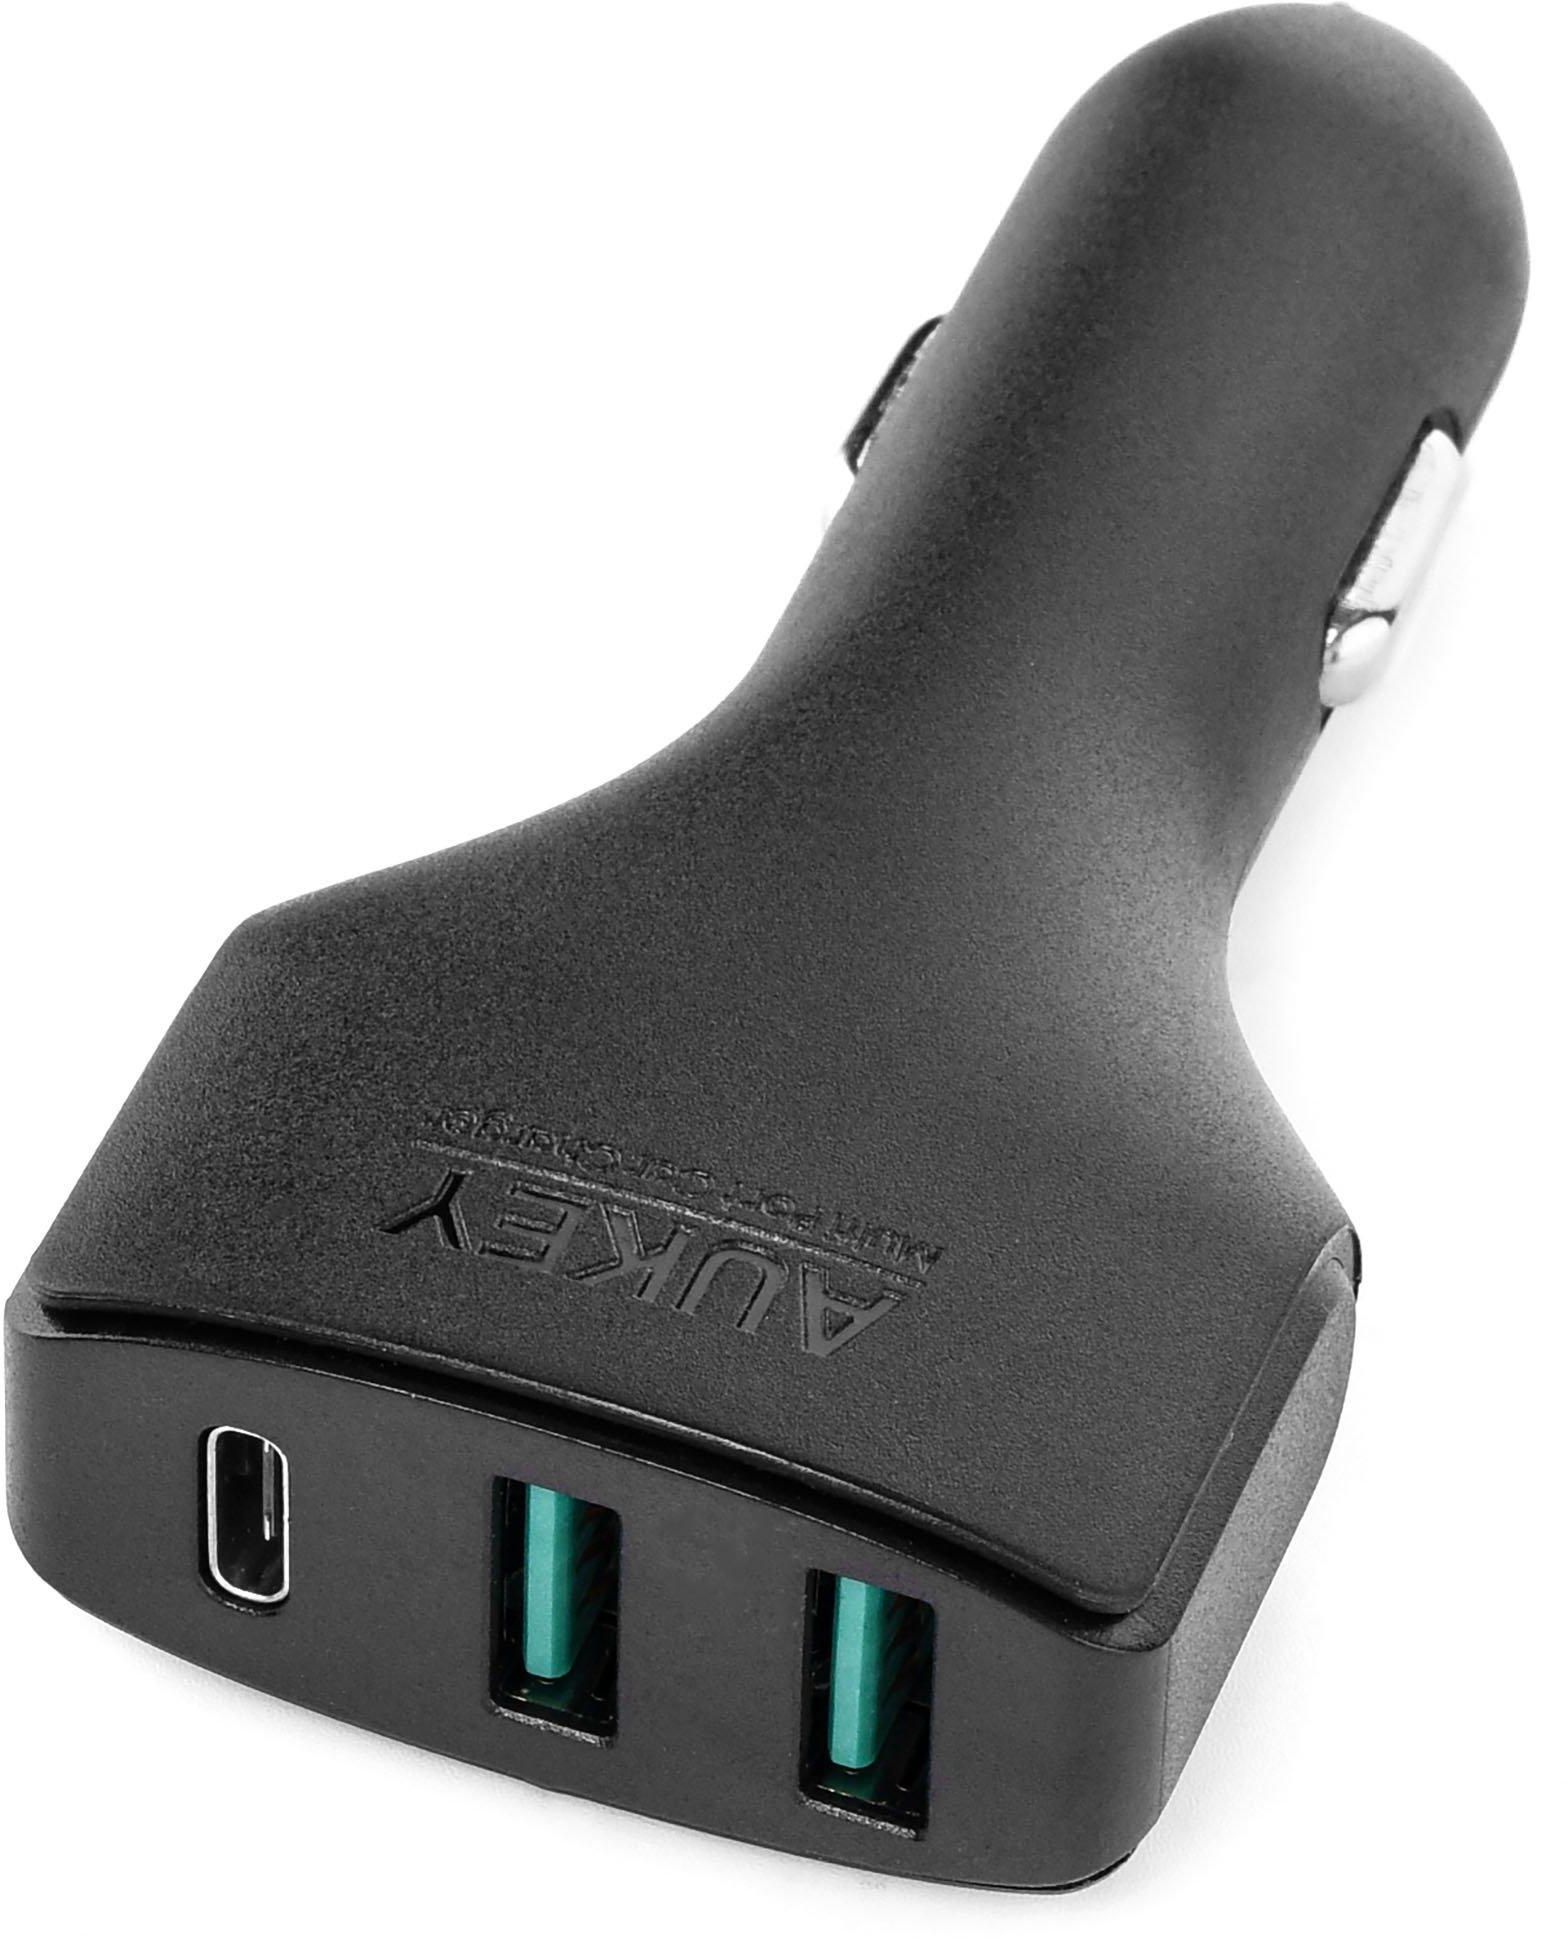 Aukey Car Charger with USB C Port & Dual Ai Power Ports with Qualcomm , Black